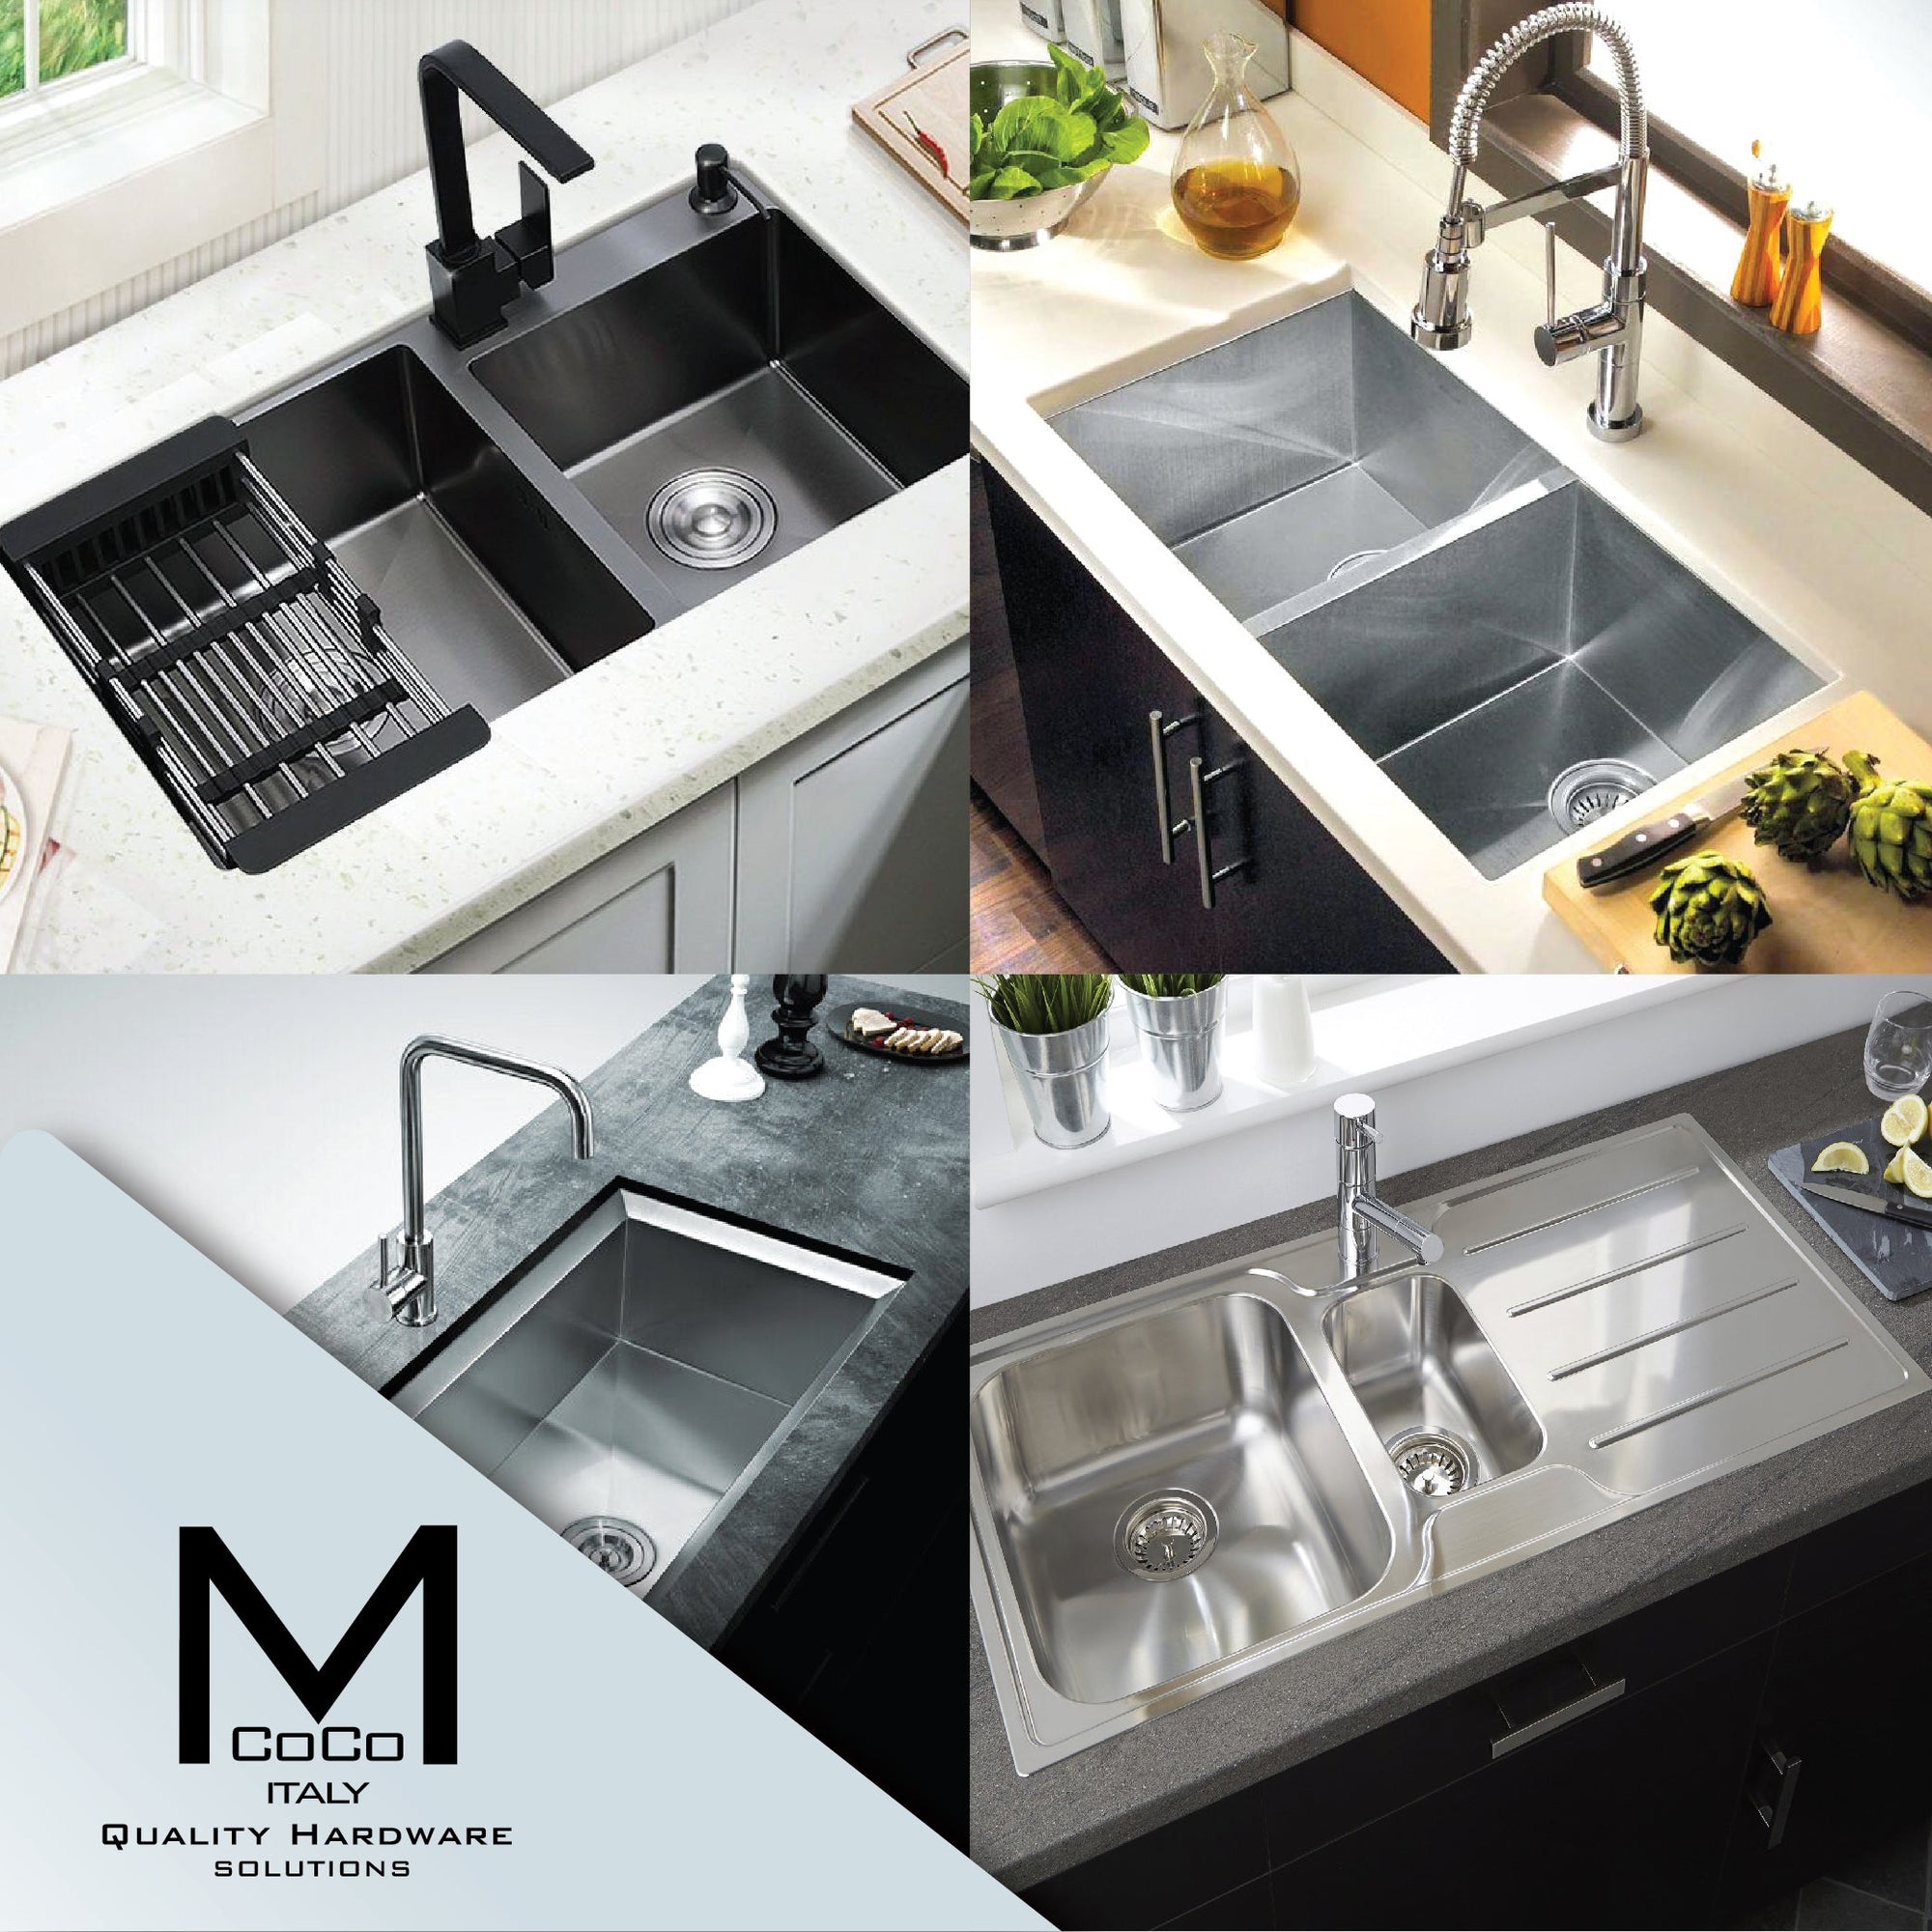 Mcoco Sinks and Taps - Beautiful and functional kitchen sinks and taps for your modern kitchen design.